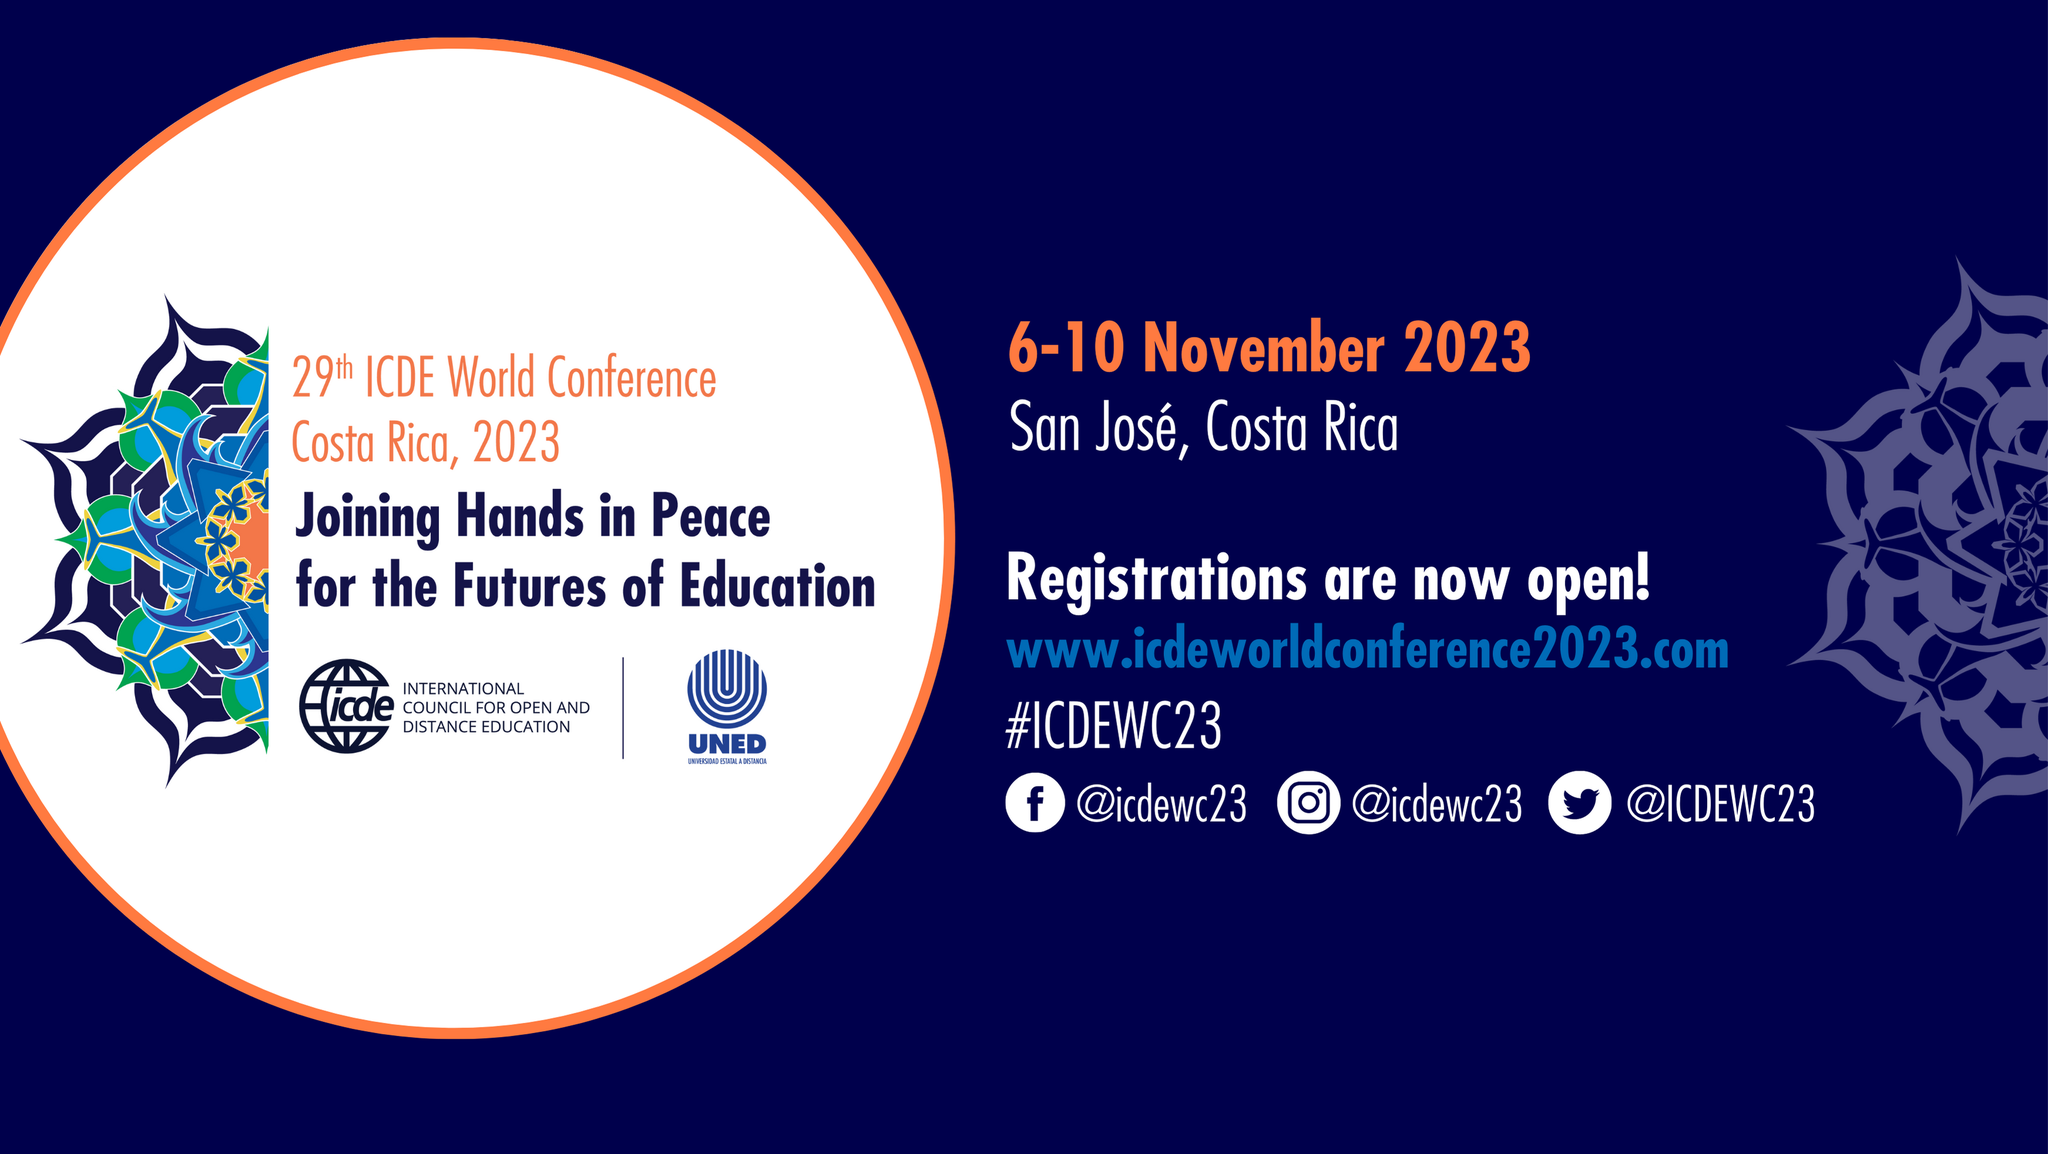 ICDE World Conference 2023